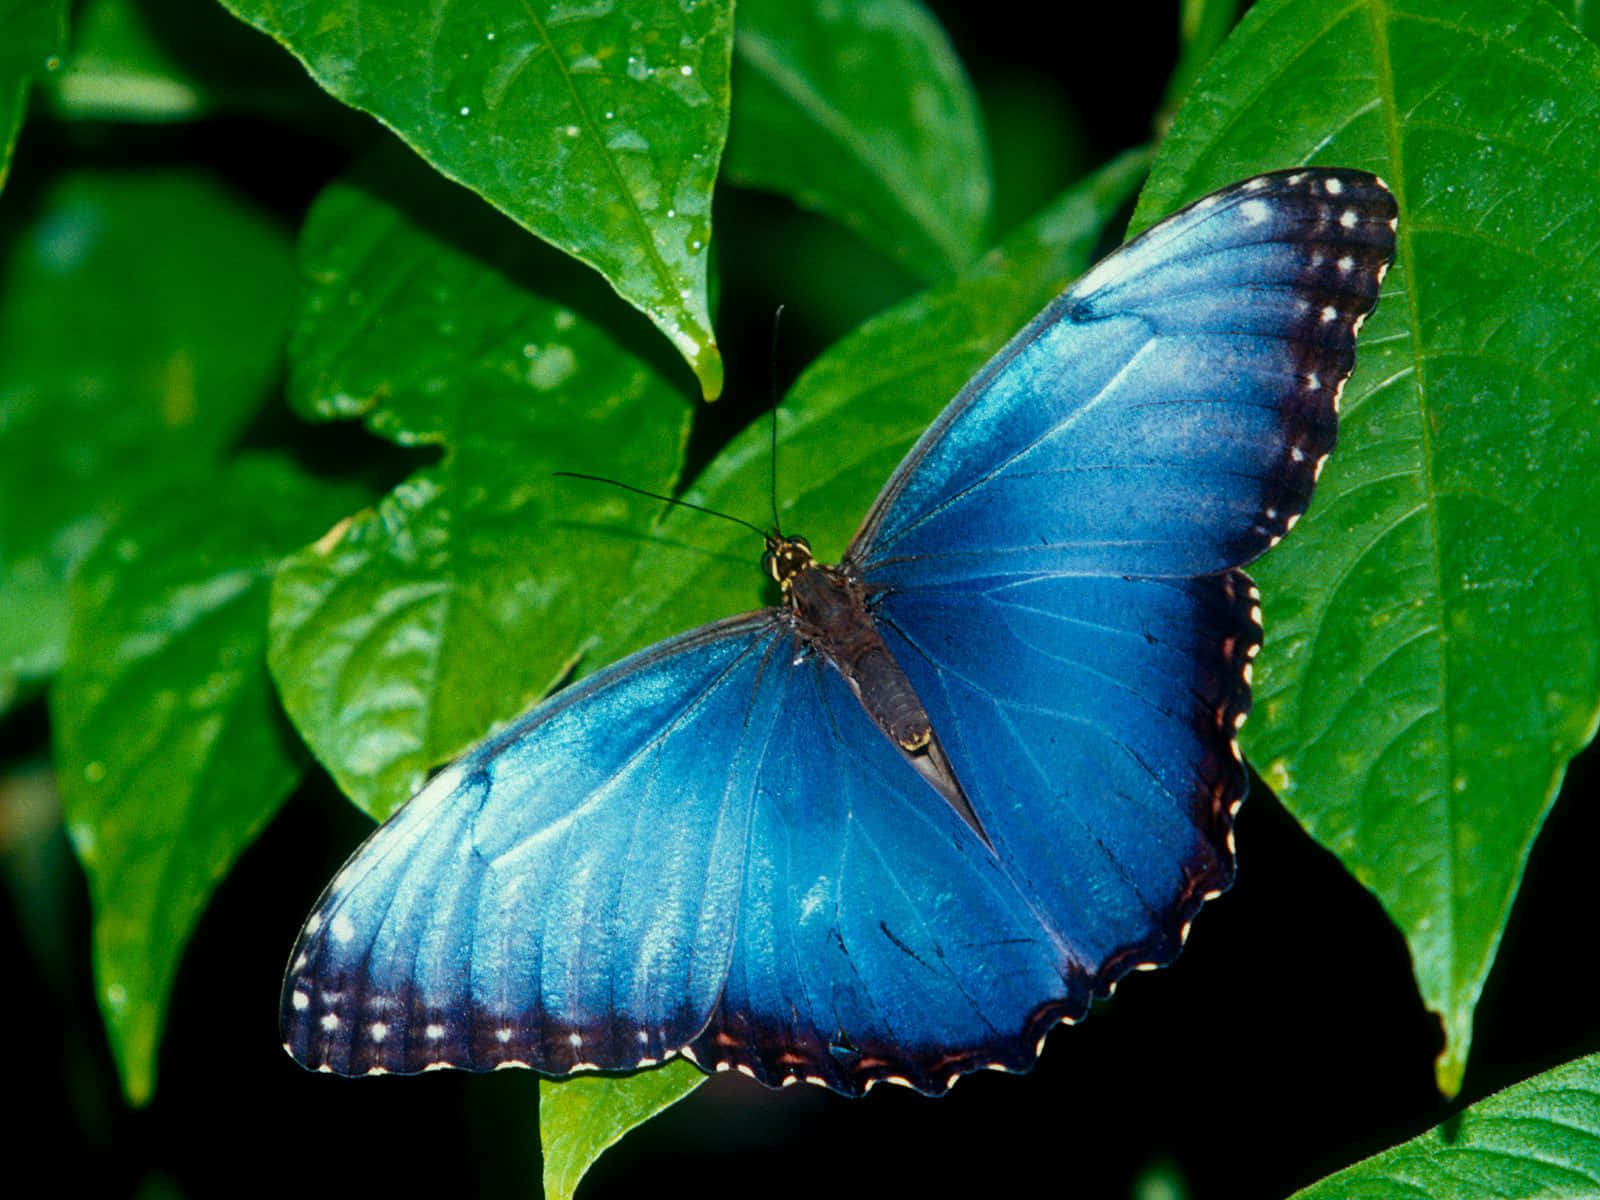 The beauty of nature, captured in a colorful butterfly photo Wallpaper